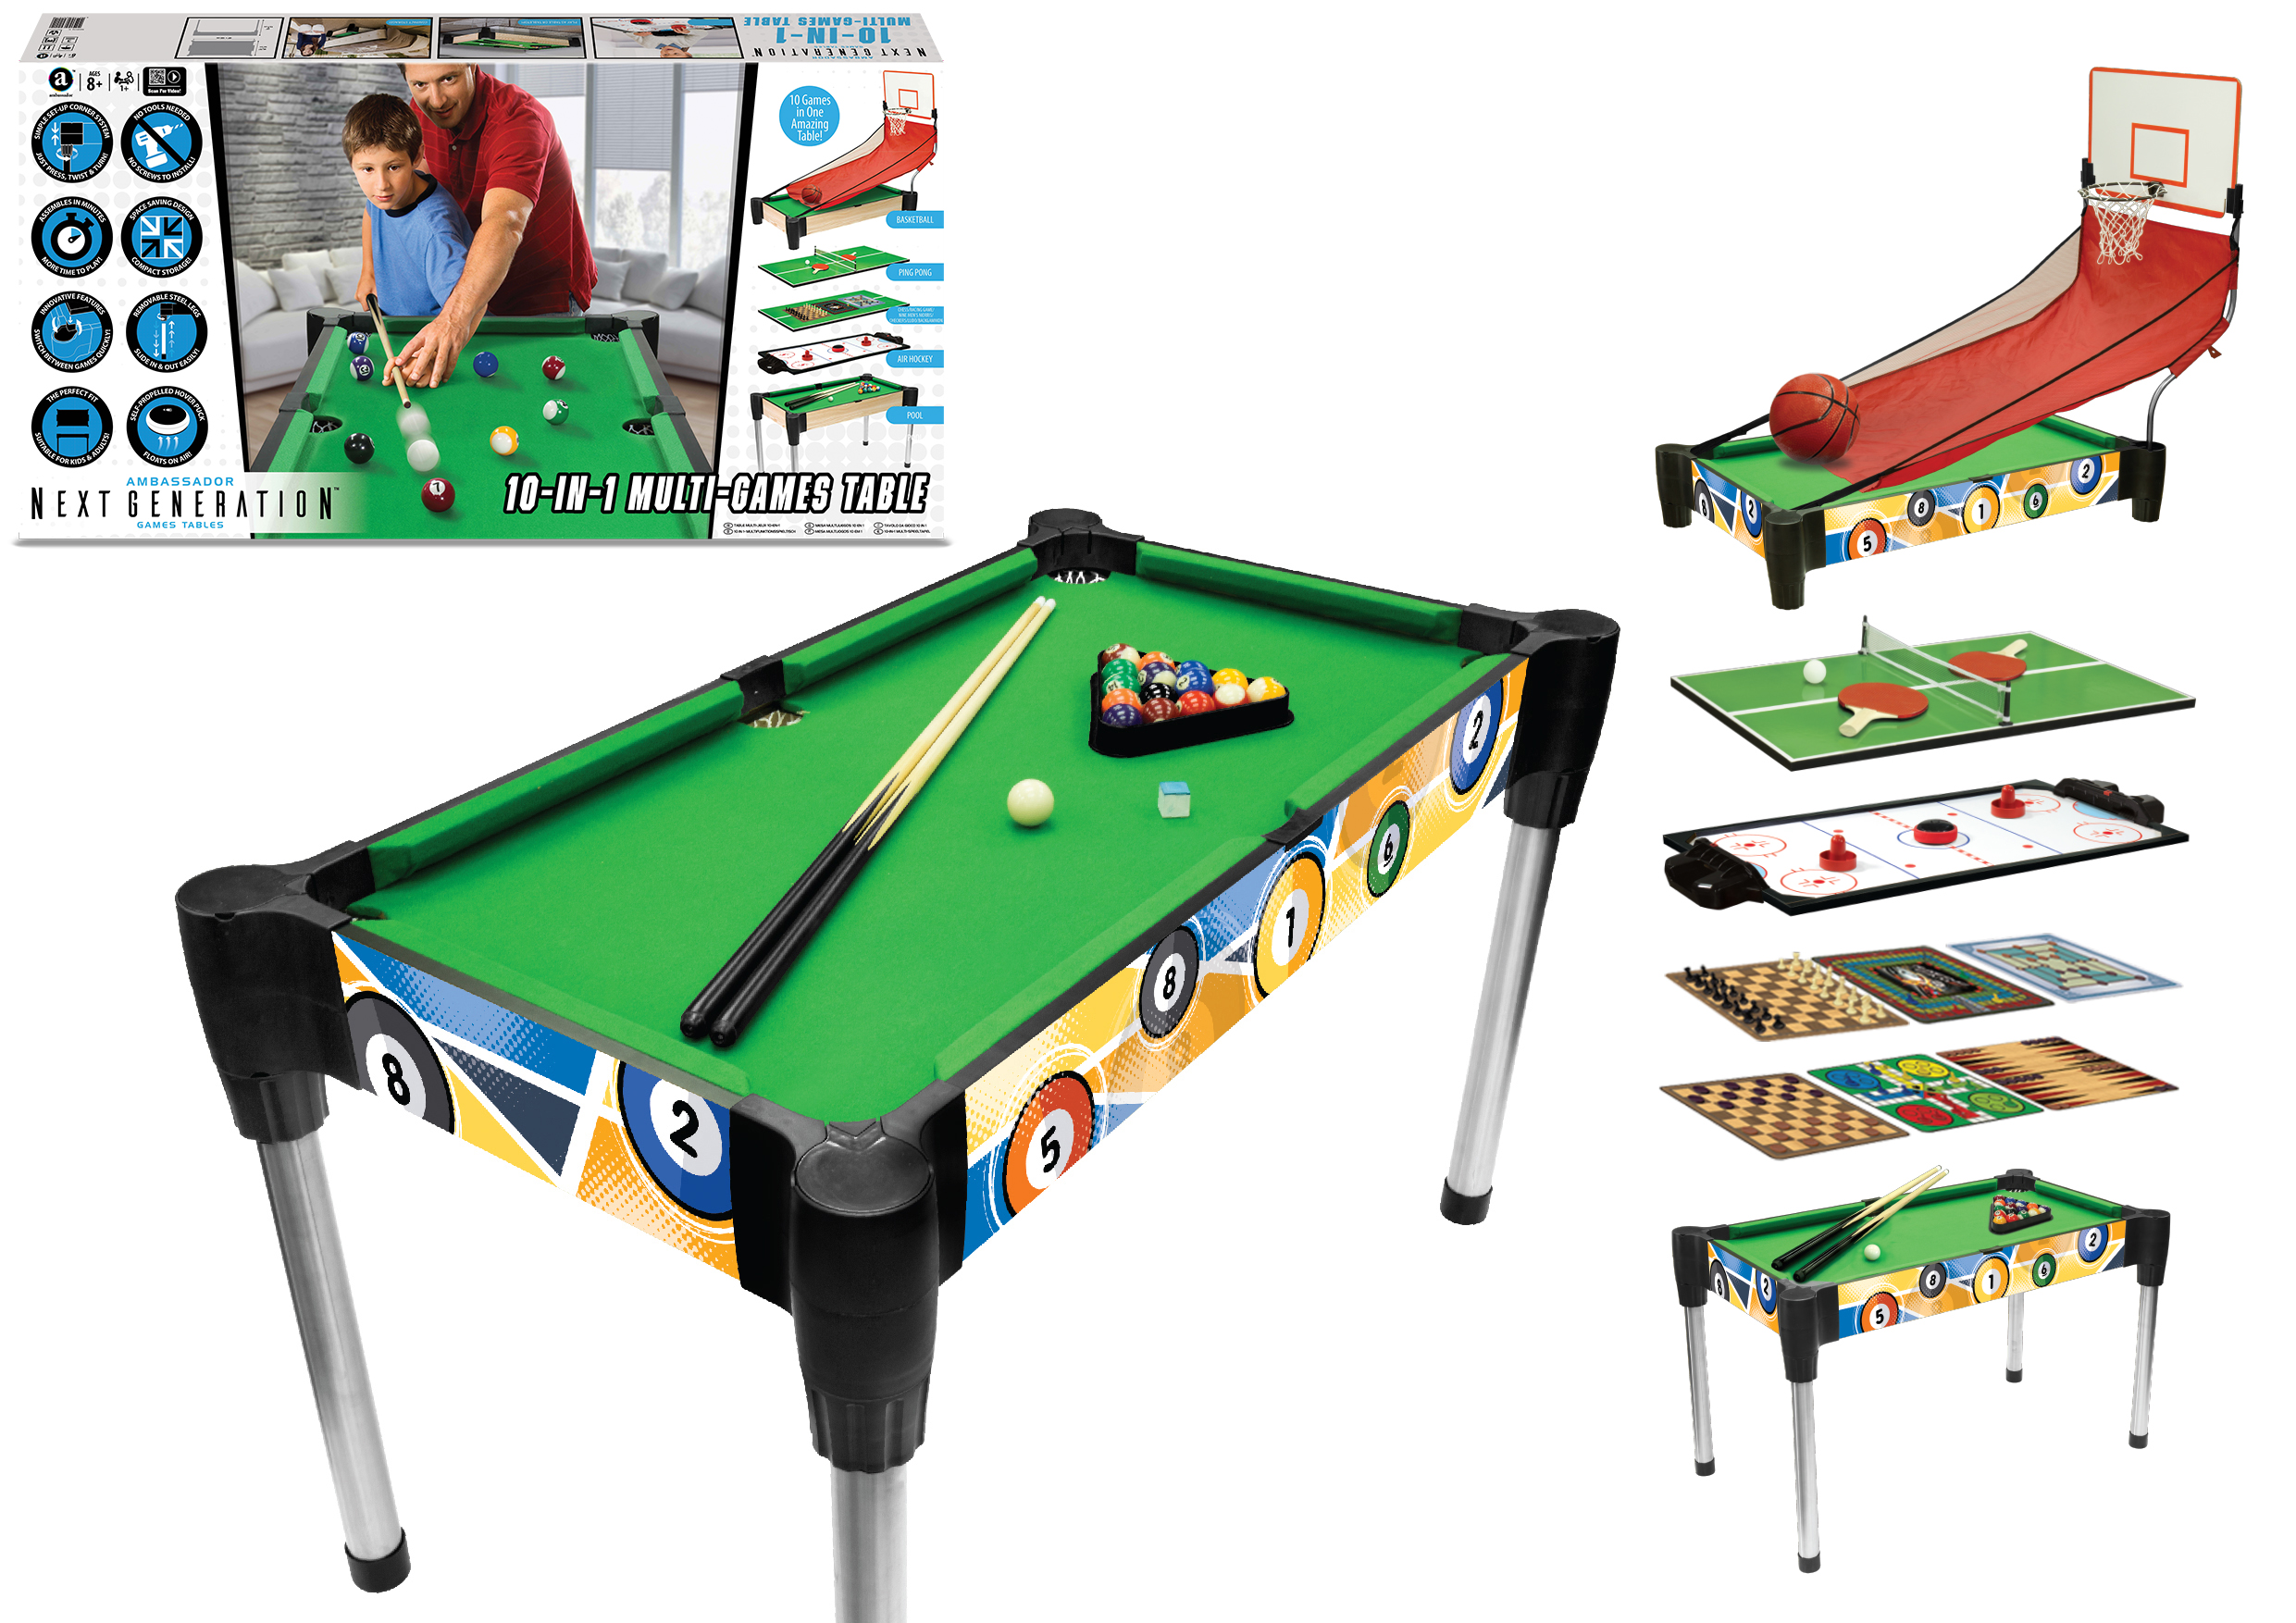 10-in-1 Games Table 122cm (MA8192H)